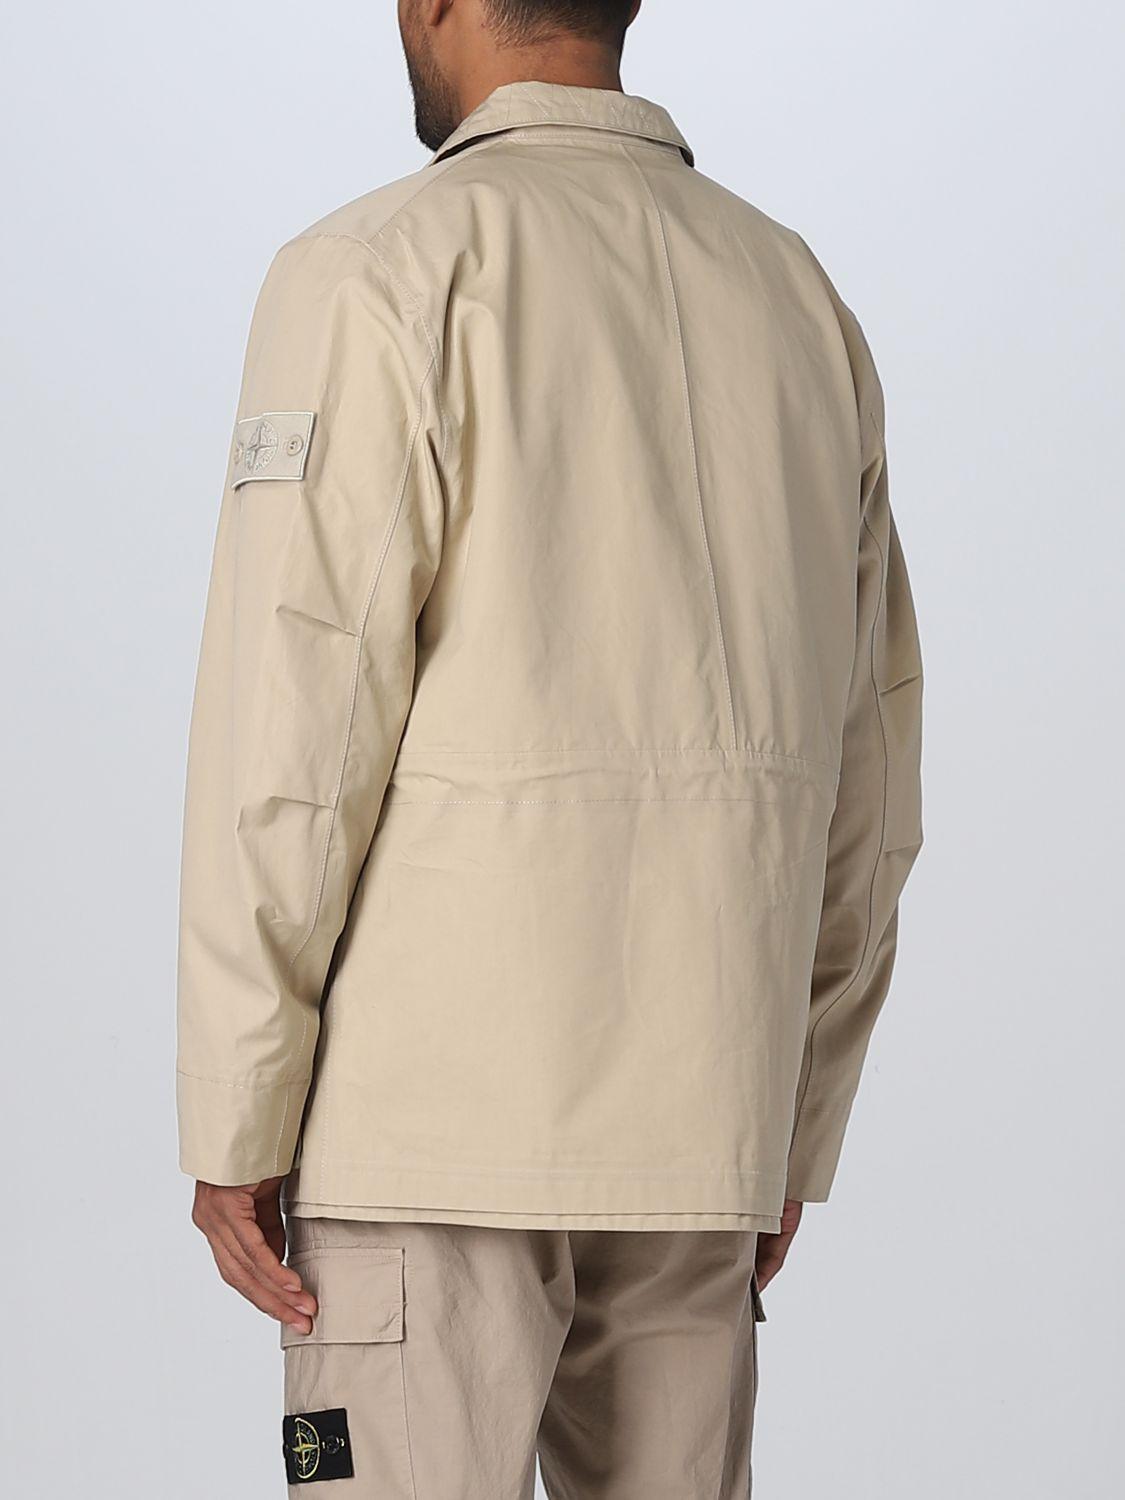 Stone Island Jacket in Natural for Men | Lyst